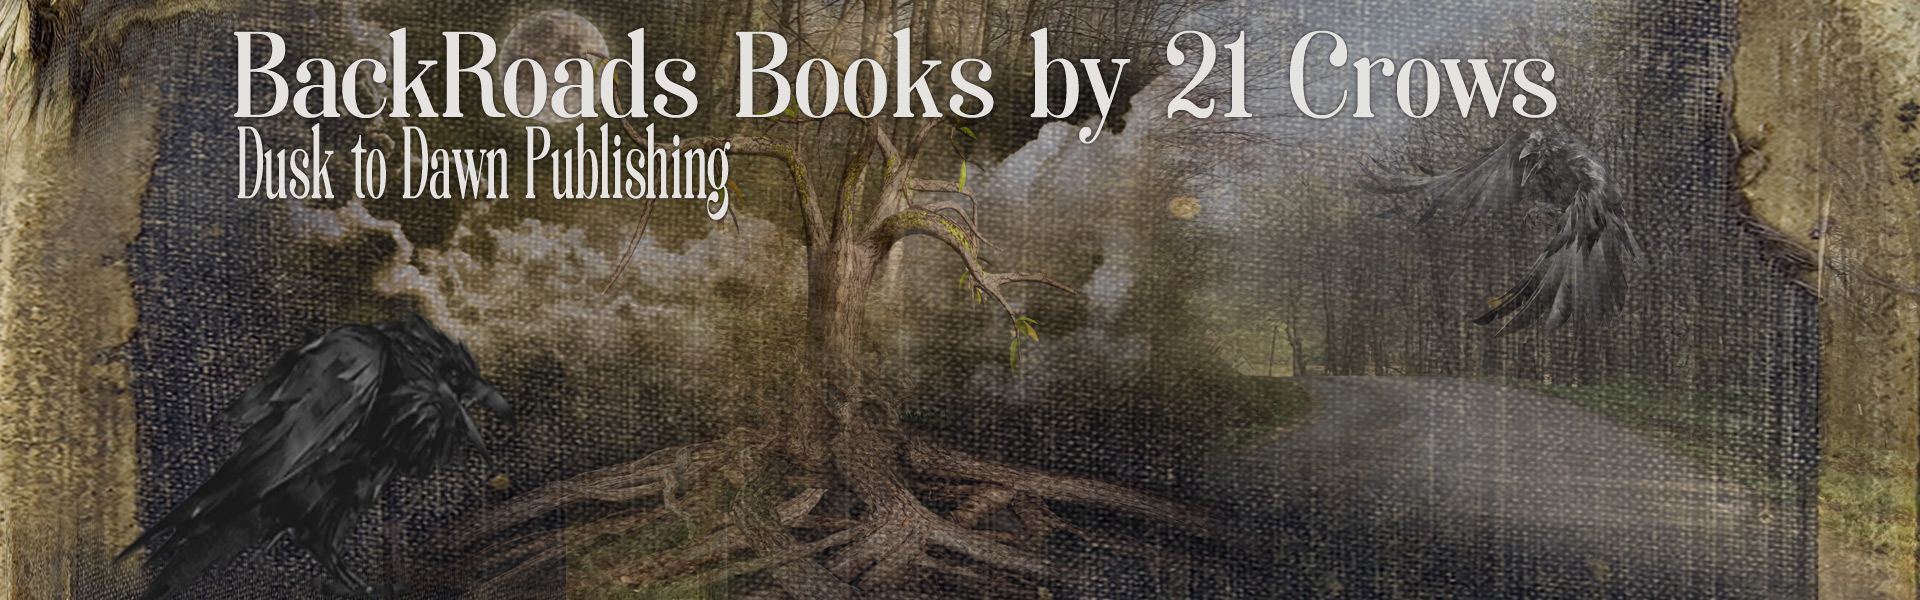 BackRoads Books by 21 Crows